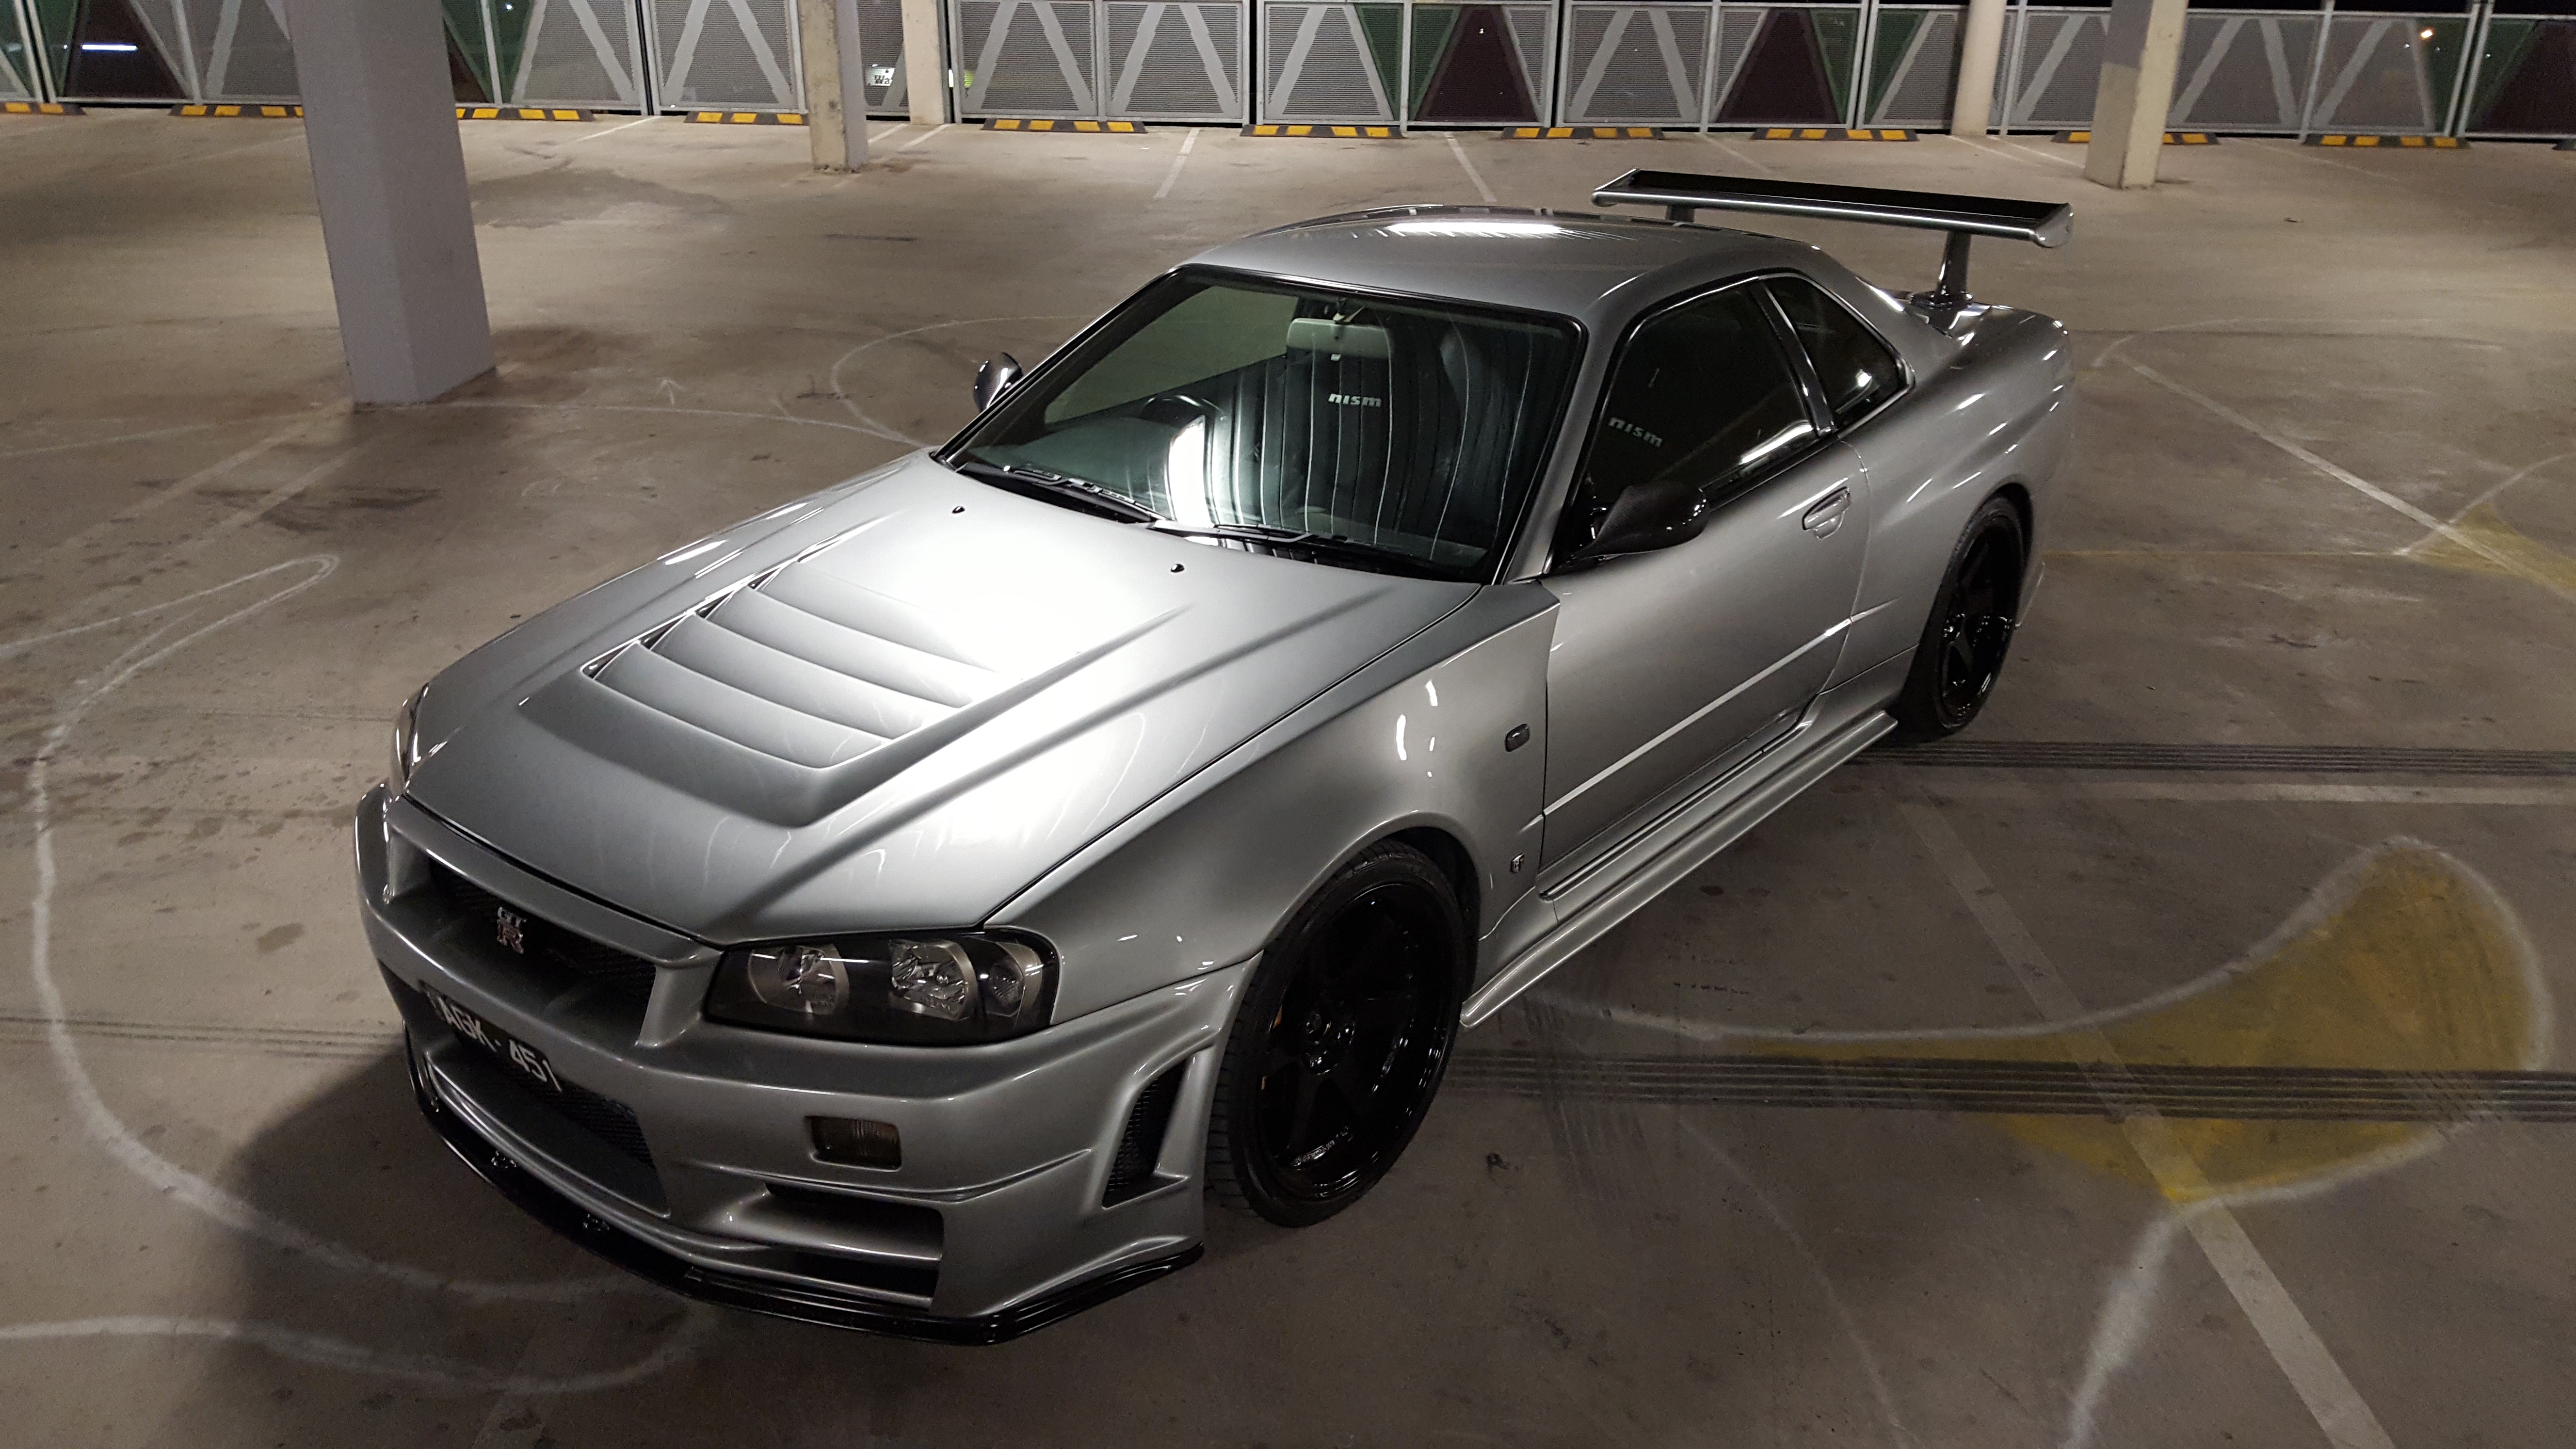 R34 Gt R Z Tune Inspired Build For Sale Private Whole Cars Only Sau Community